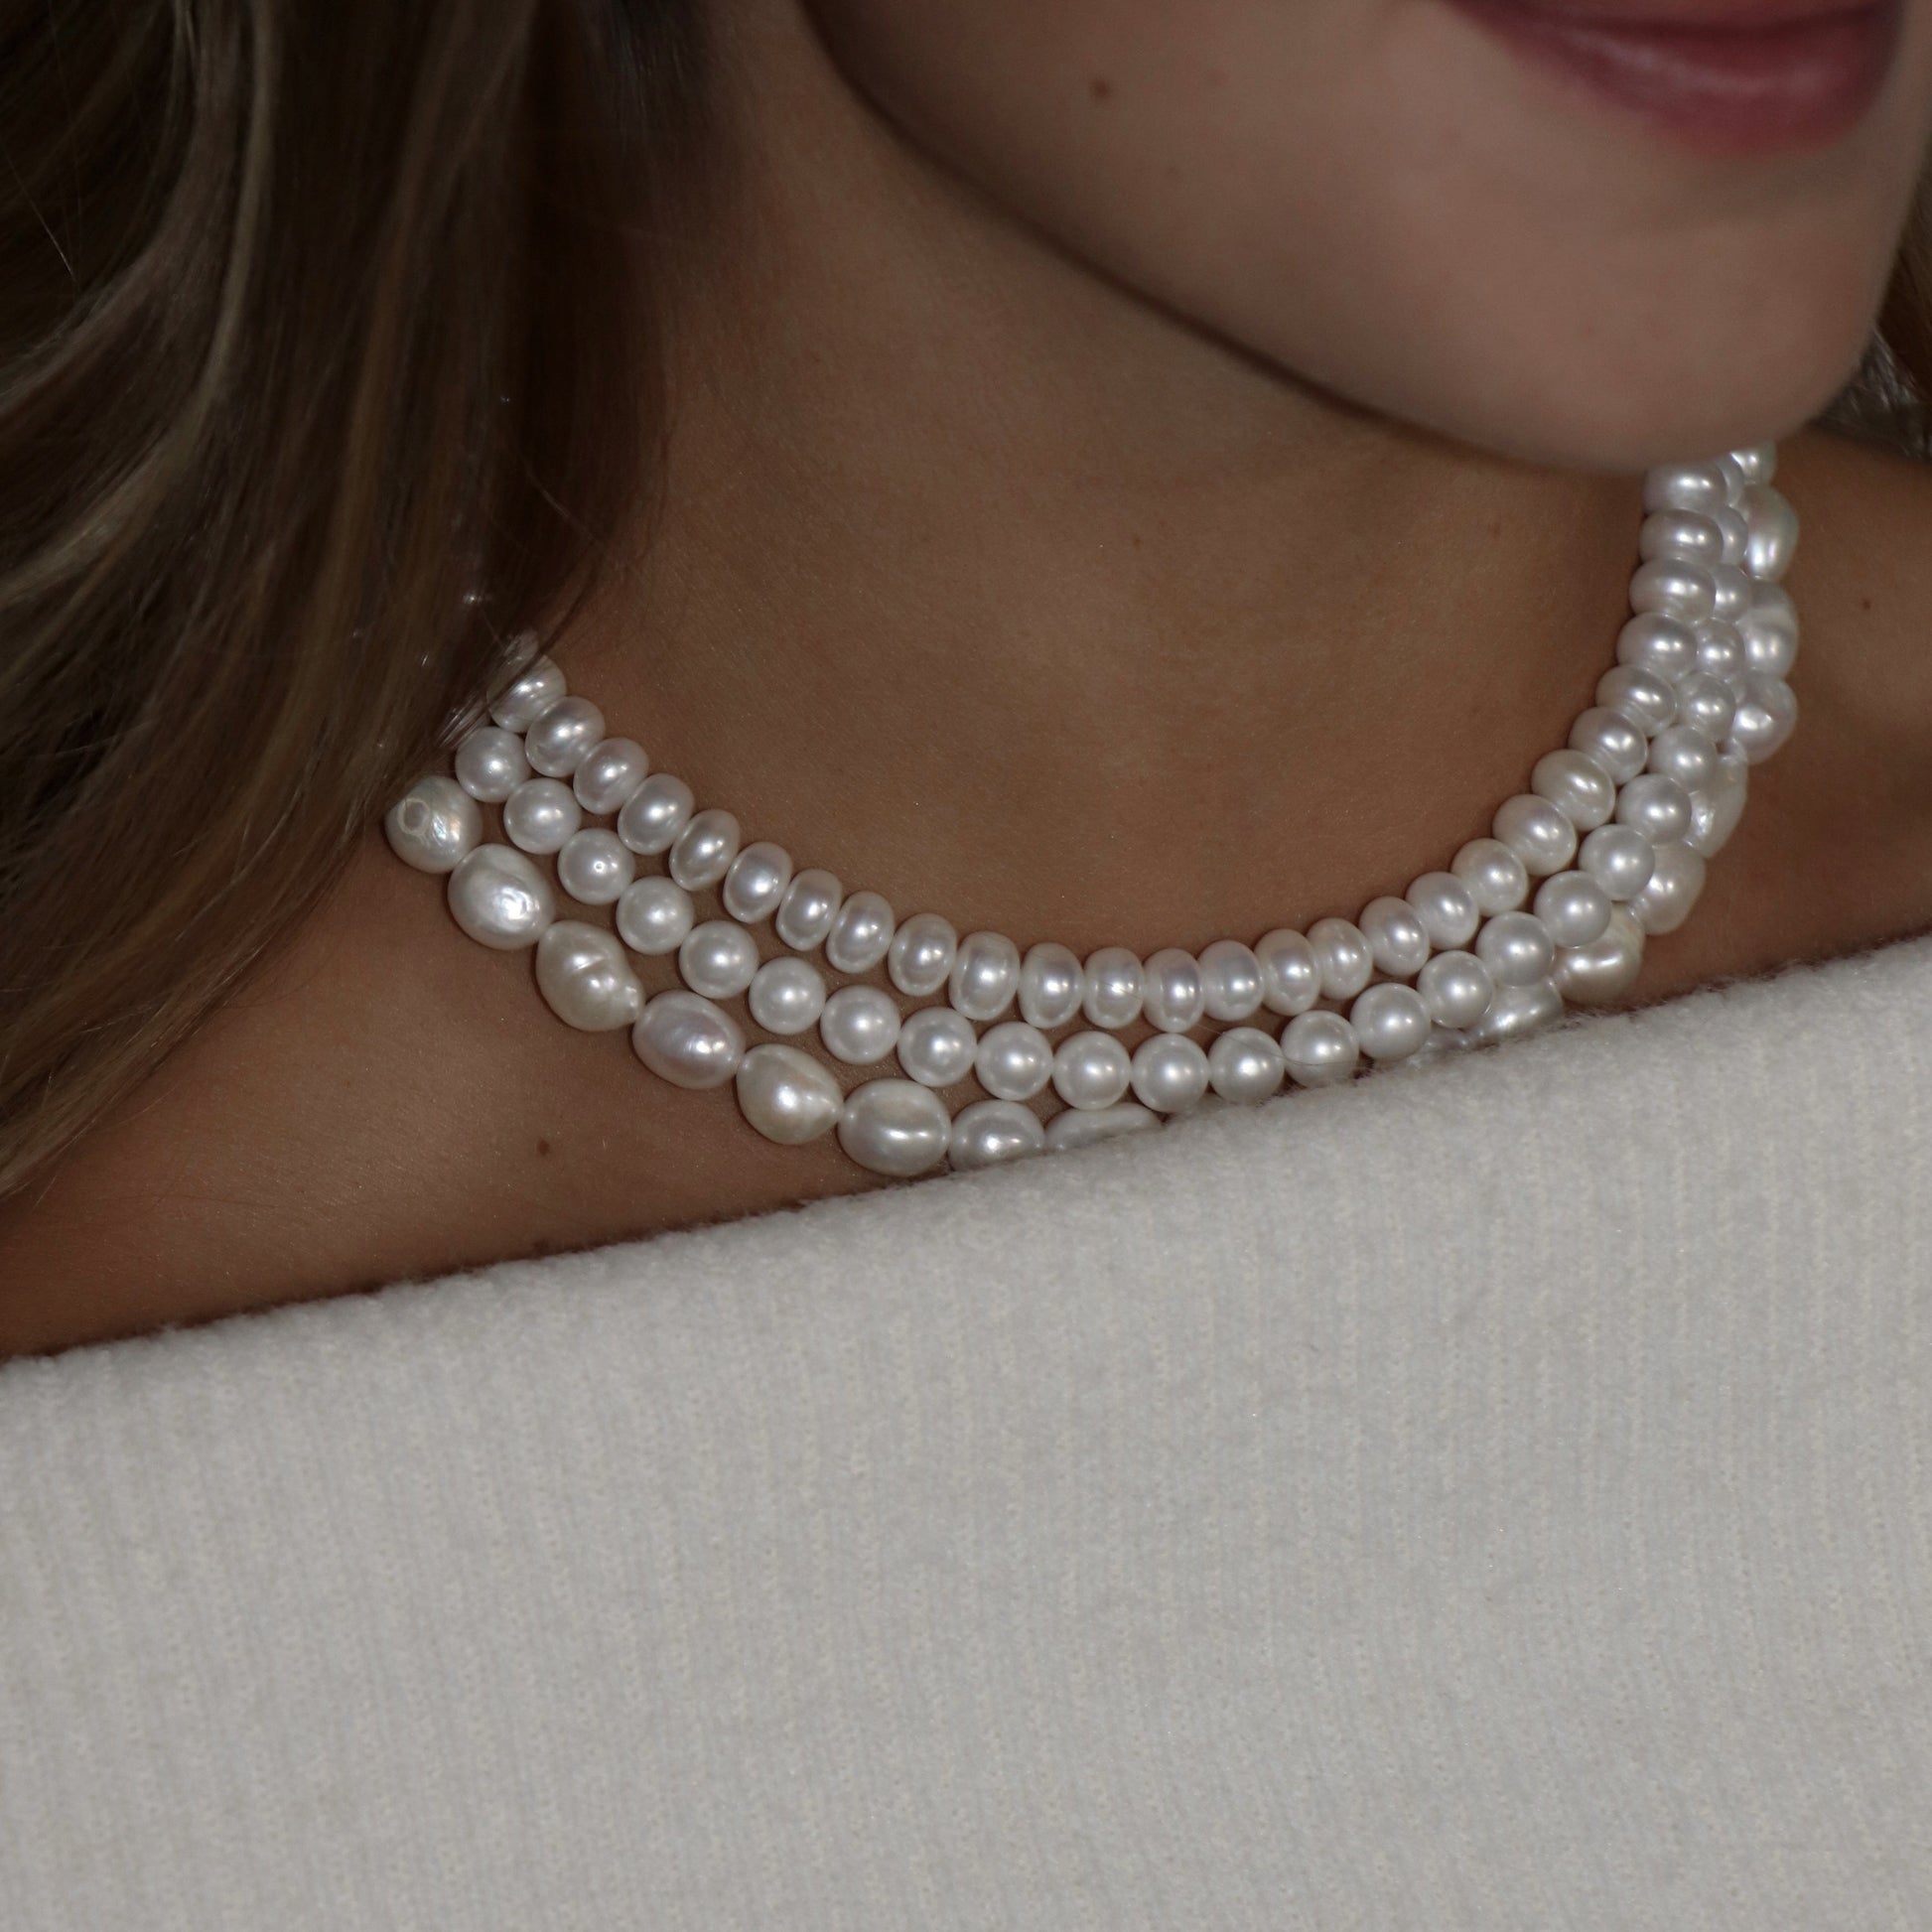 three strand pearl necklace, Jackie O necklace, classic style, occasion necklace, statement necklace, white pearl necklace